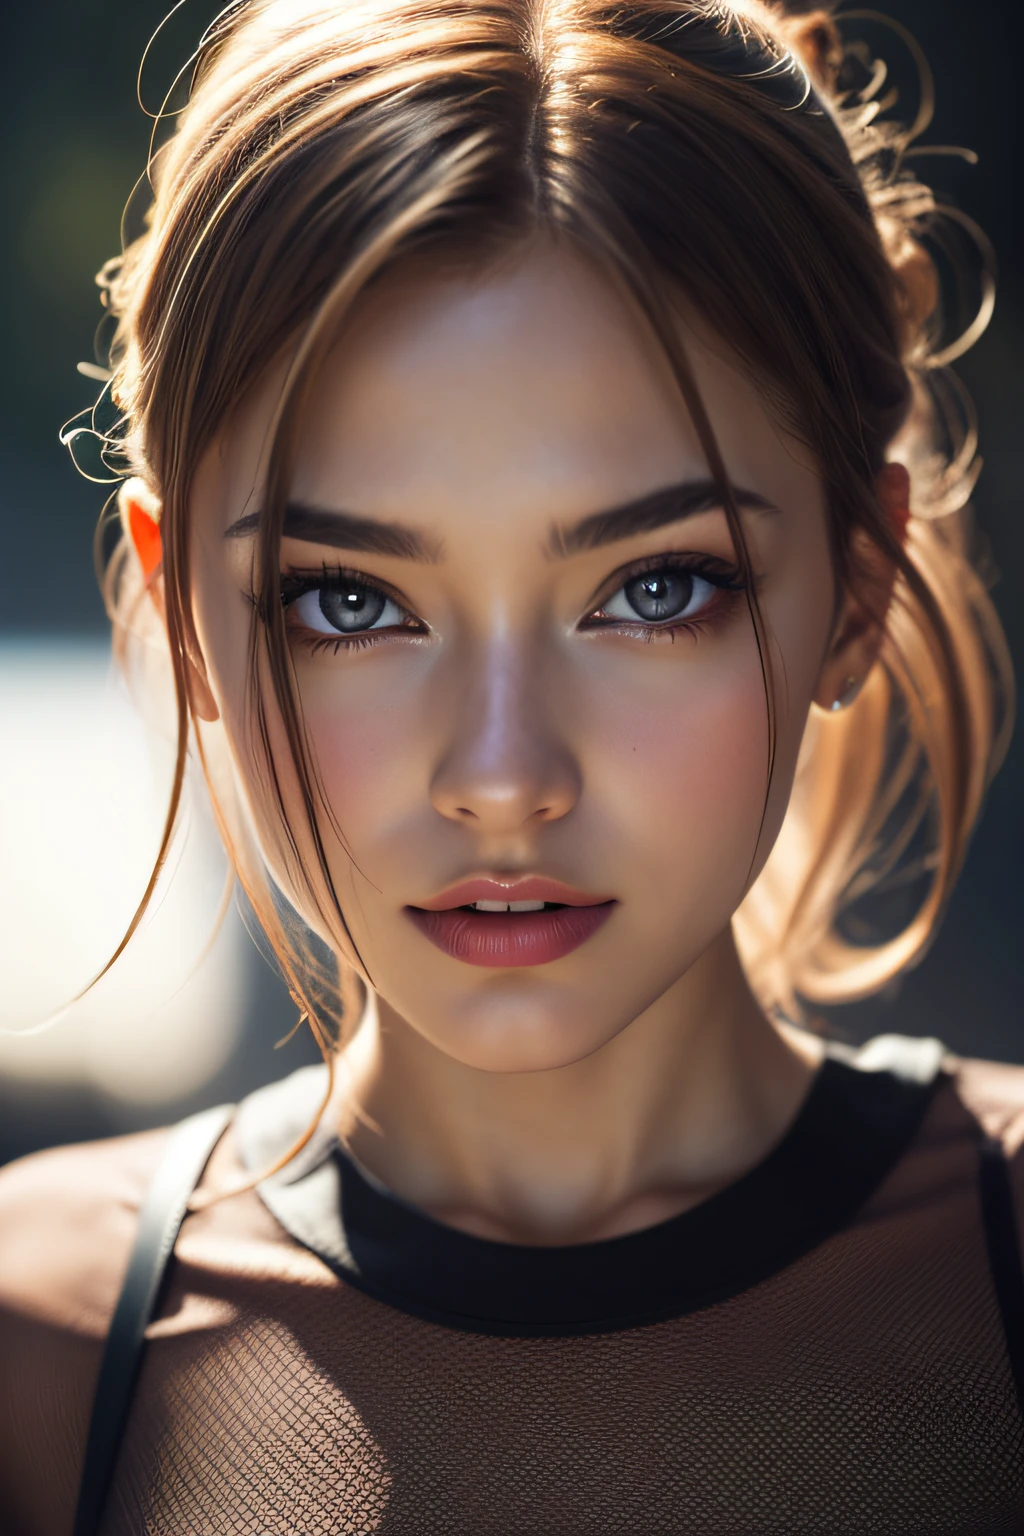 (CG Unity 8K wallpaper in extreme detail, masterpiece, highest quality), 2 girls, transparent clothes, held from below, (camera below) looking at the camera, lips open, shyness, enjoyment, breasts, beauty, perfect figure, cinematic lens, diffuse